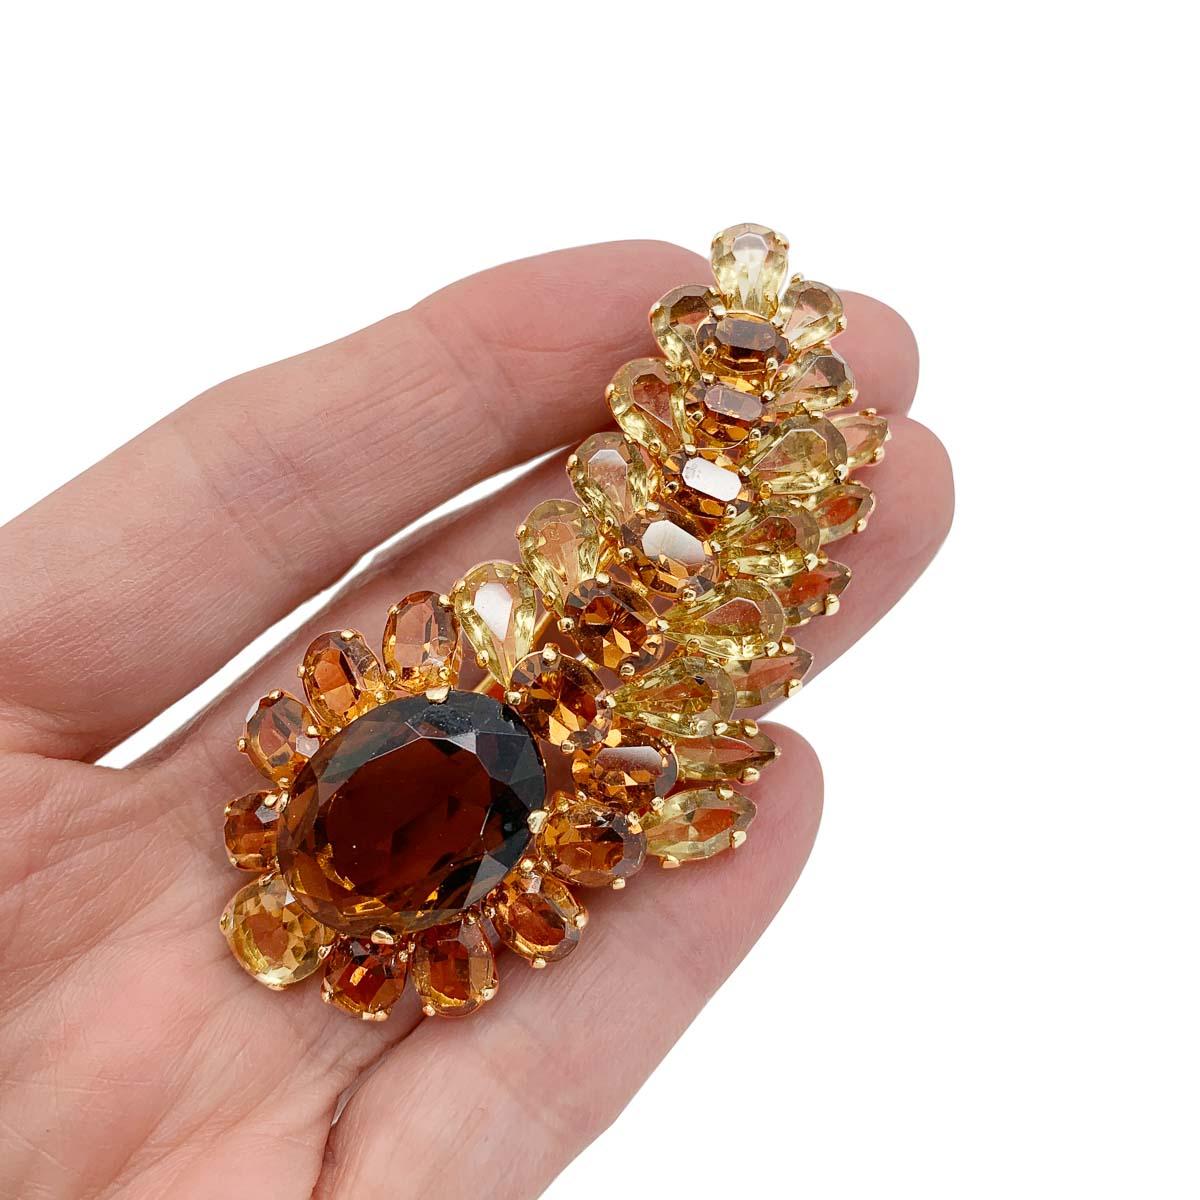 An exquisite vintage Christian Dior topaz brooch made in the year following Christian Dior's untimely passing, 1958 with Yves Saint Laurent at the helm of the House. Featuring a plume of citrine and topaz colour crystals in fancy cuts including